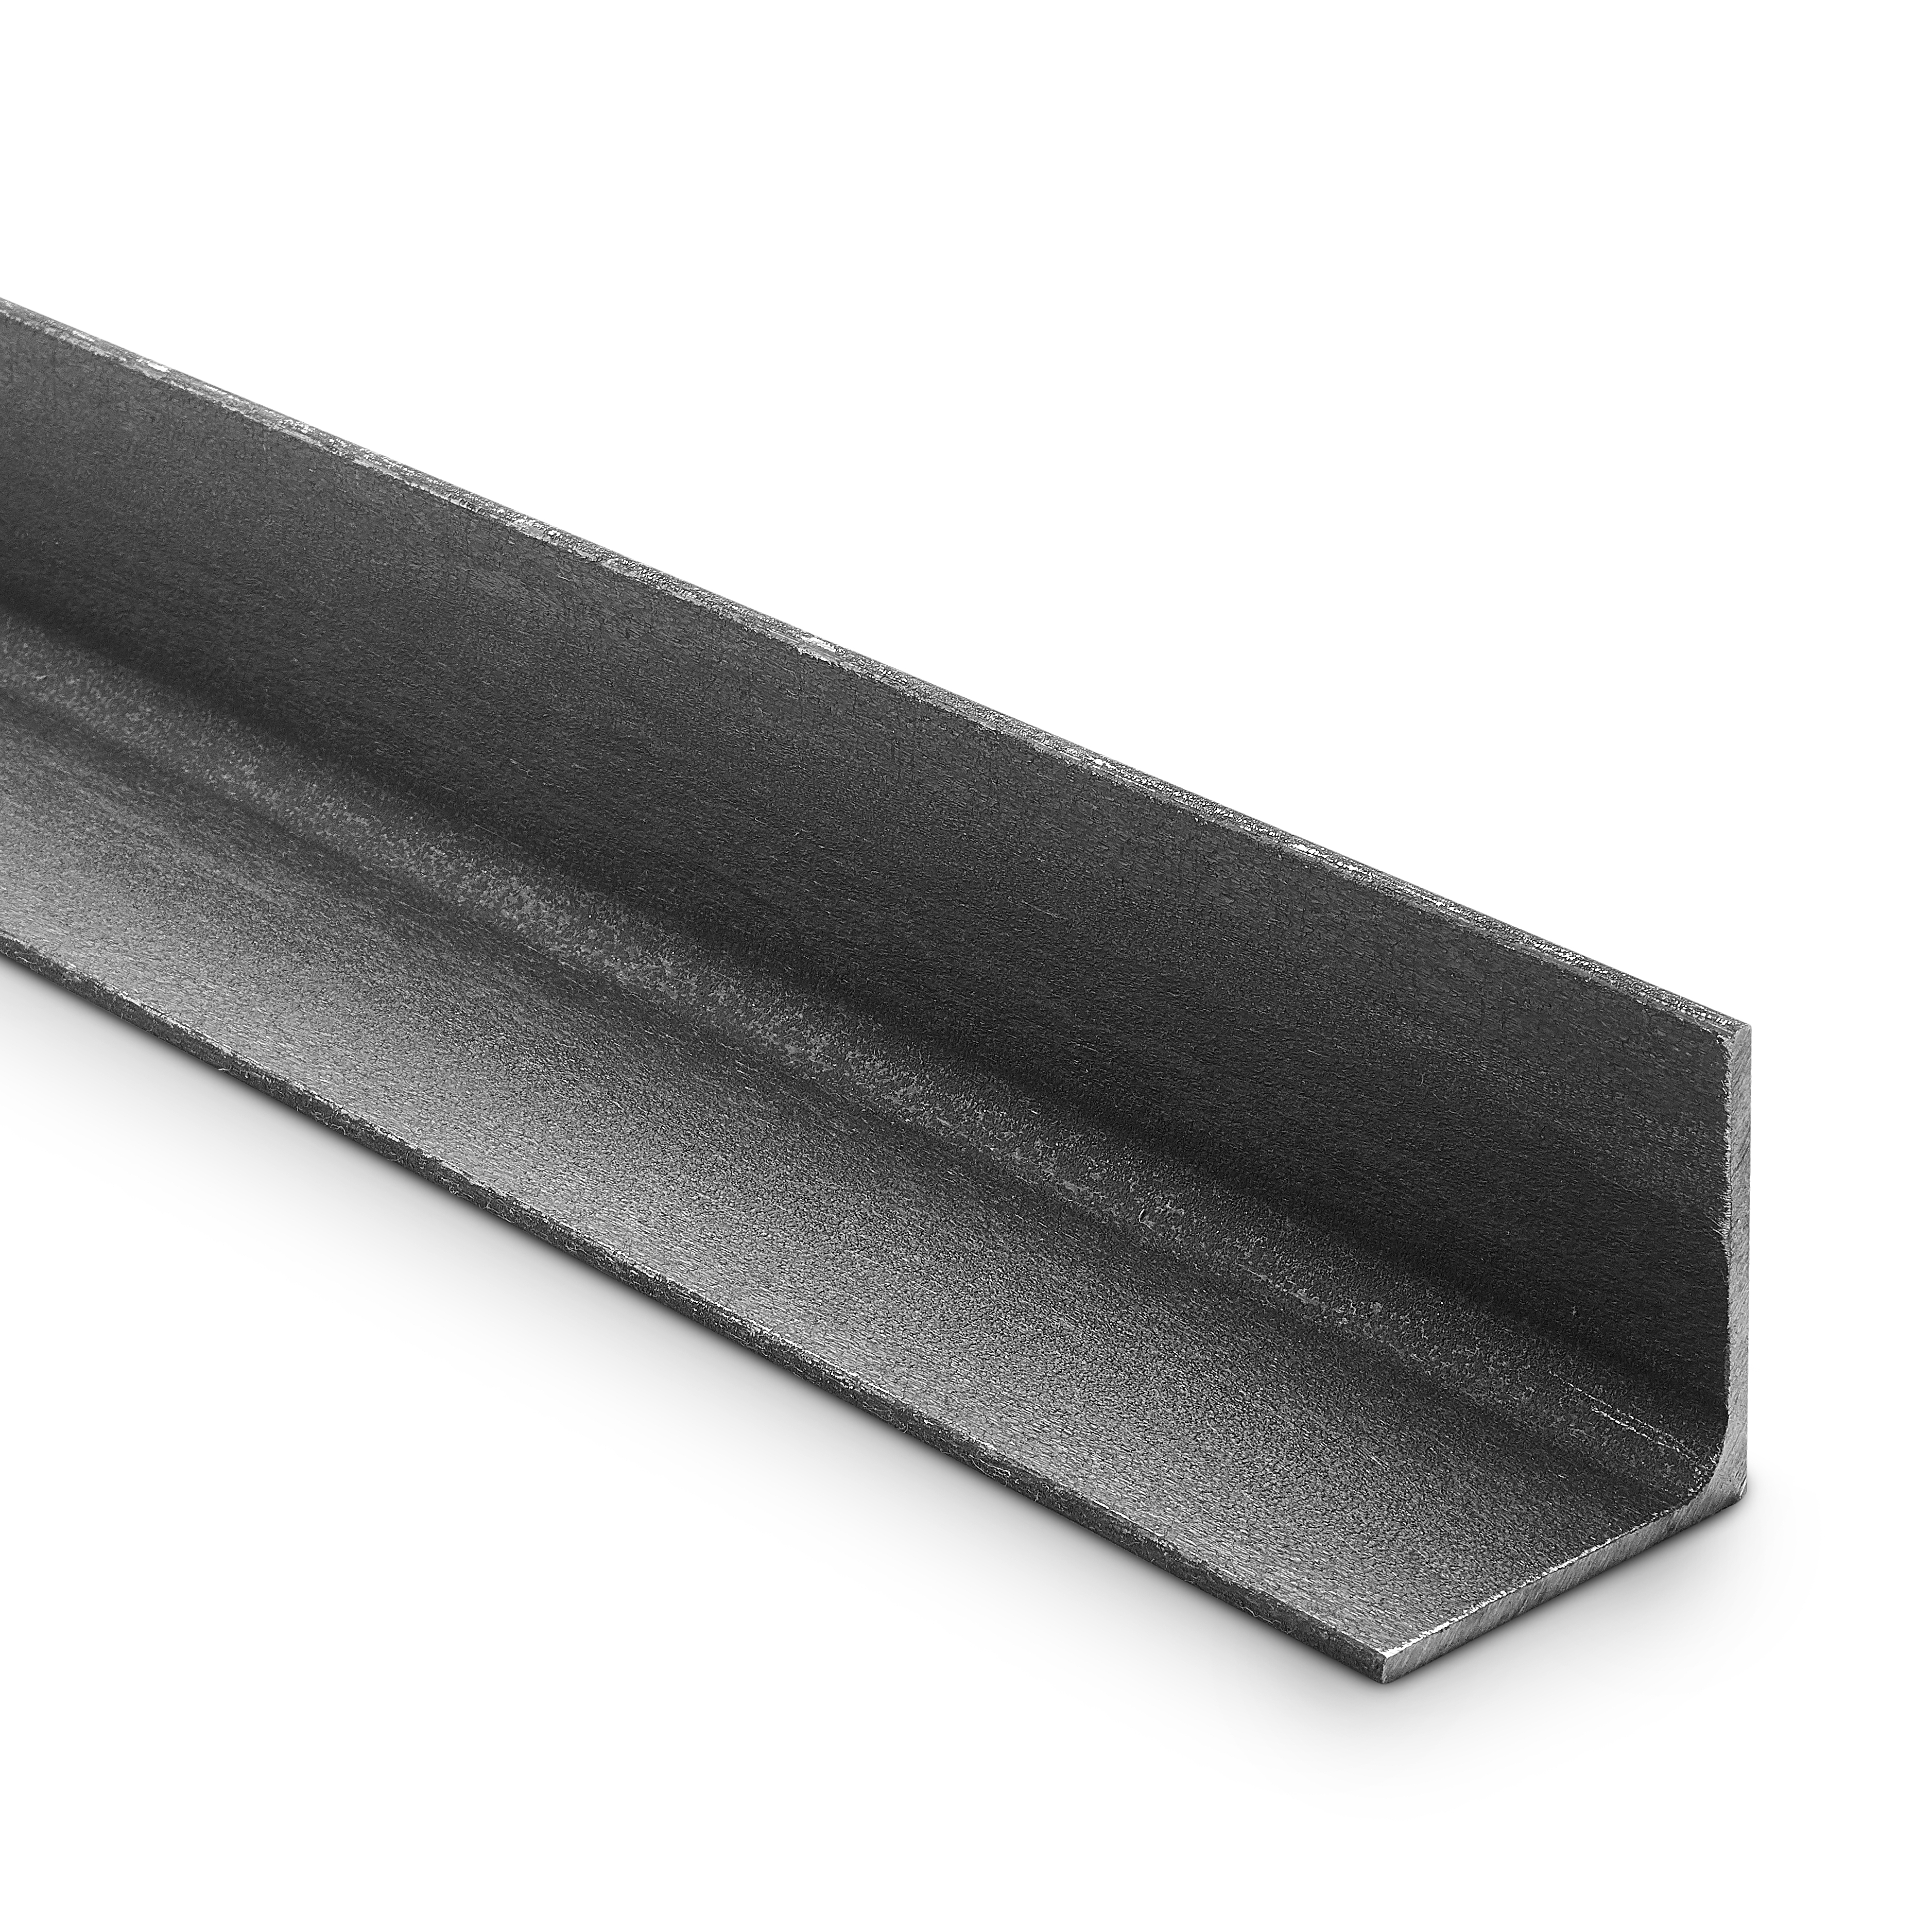 Fabrication 25mm x 25mm AND 50mm x 50mm Sizes Mild Steel Angle Iron Section 